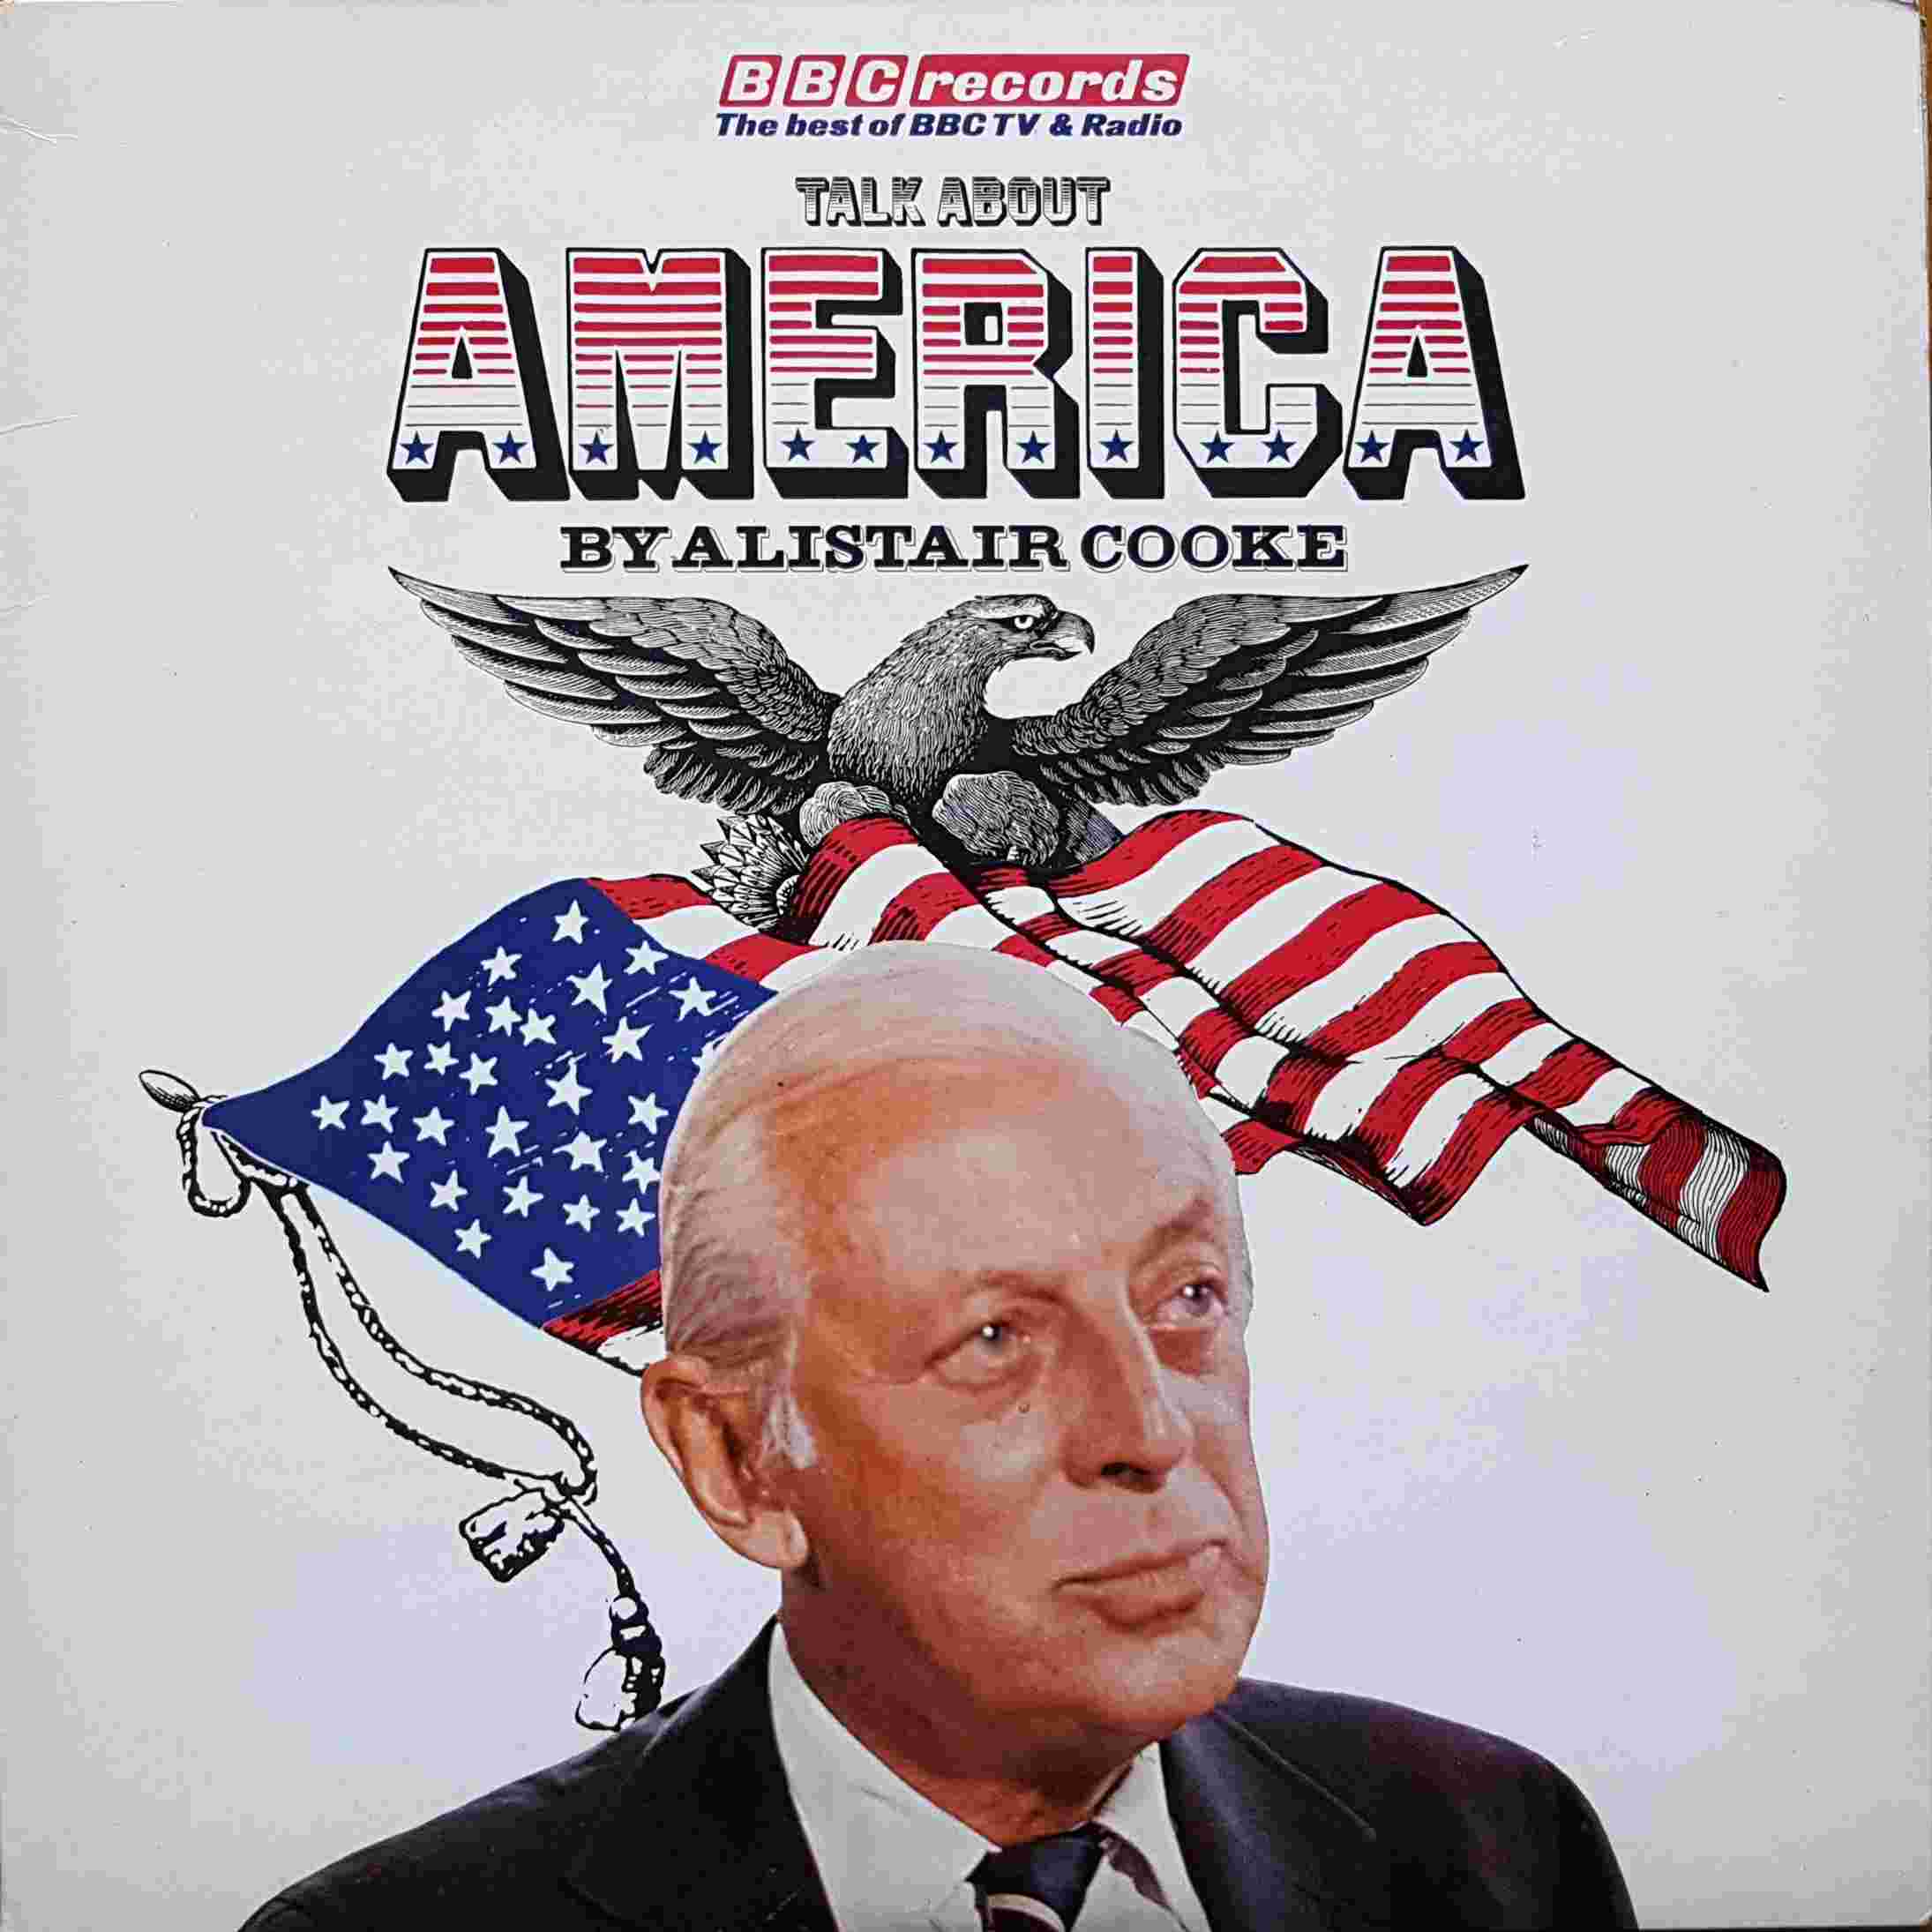 Picture of Talk about America by artist Alistair Cooke from the BBC albums - Records and Tapes library